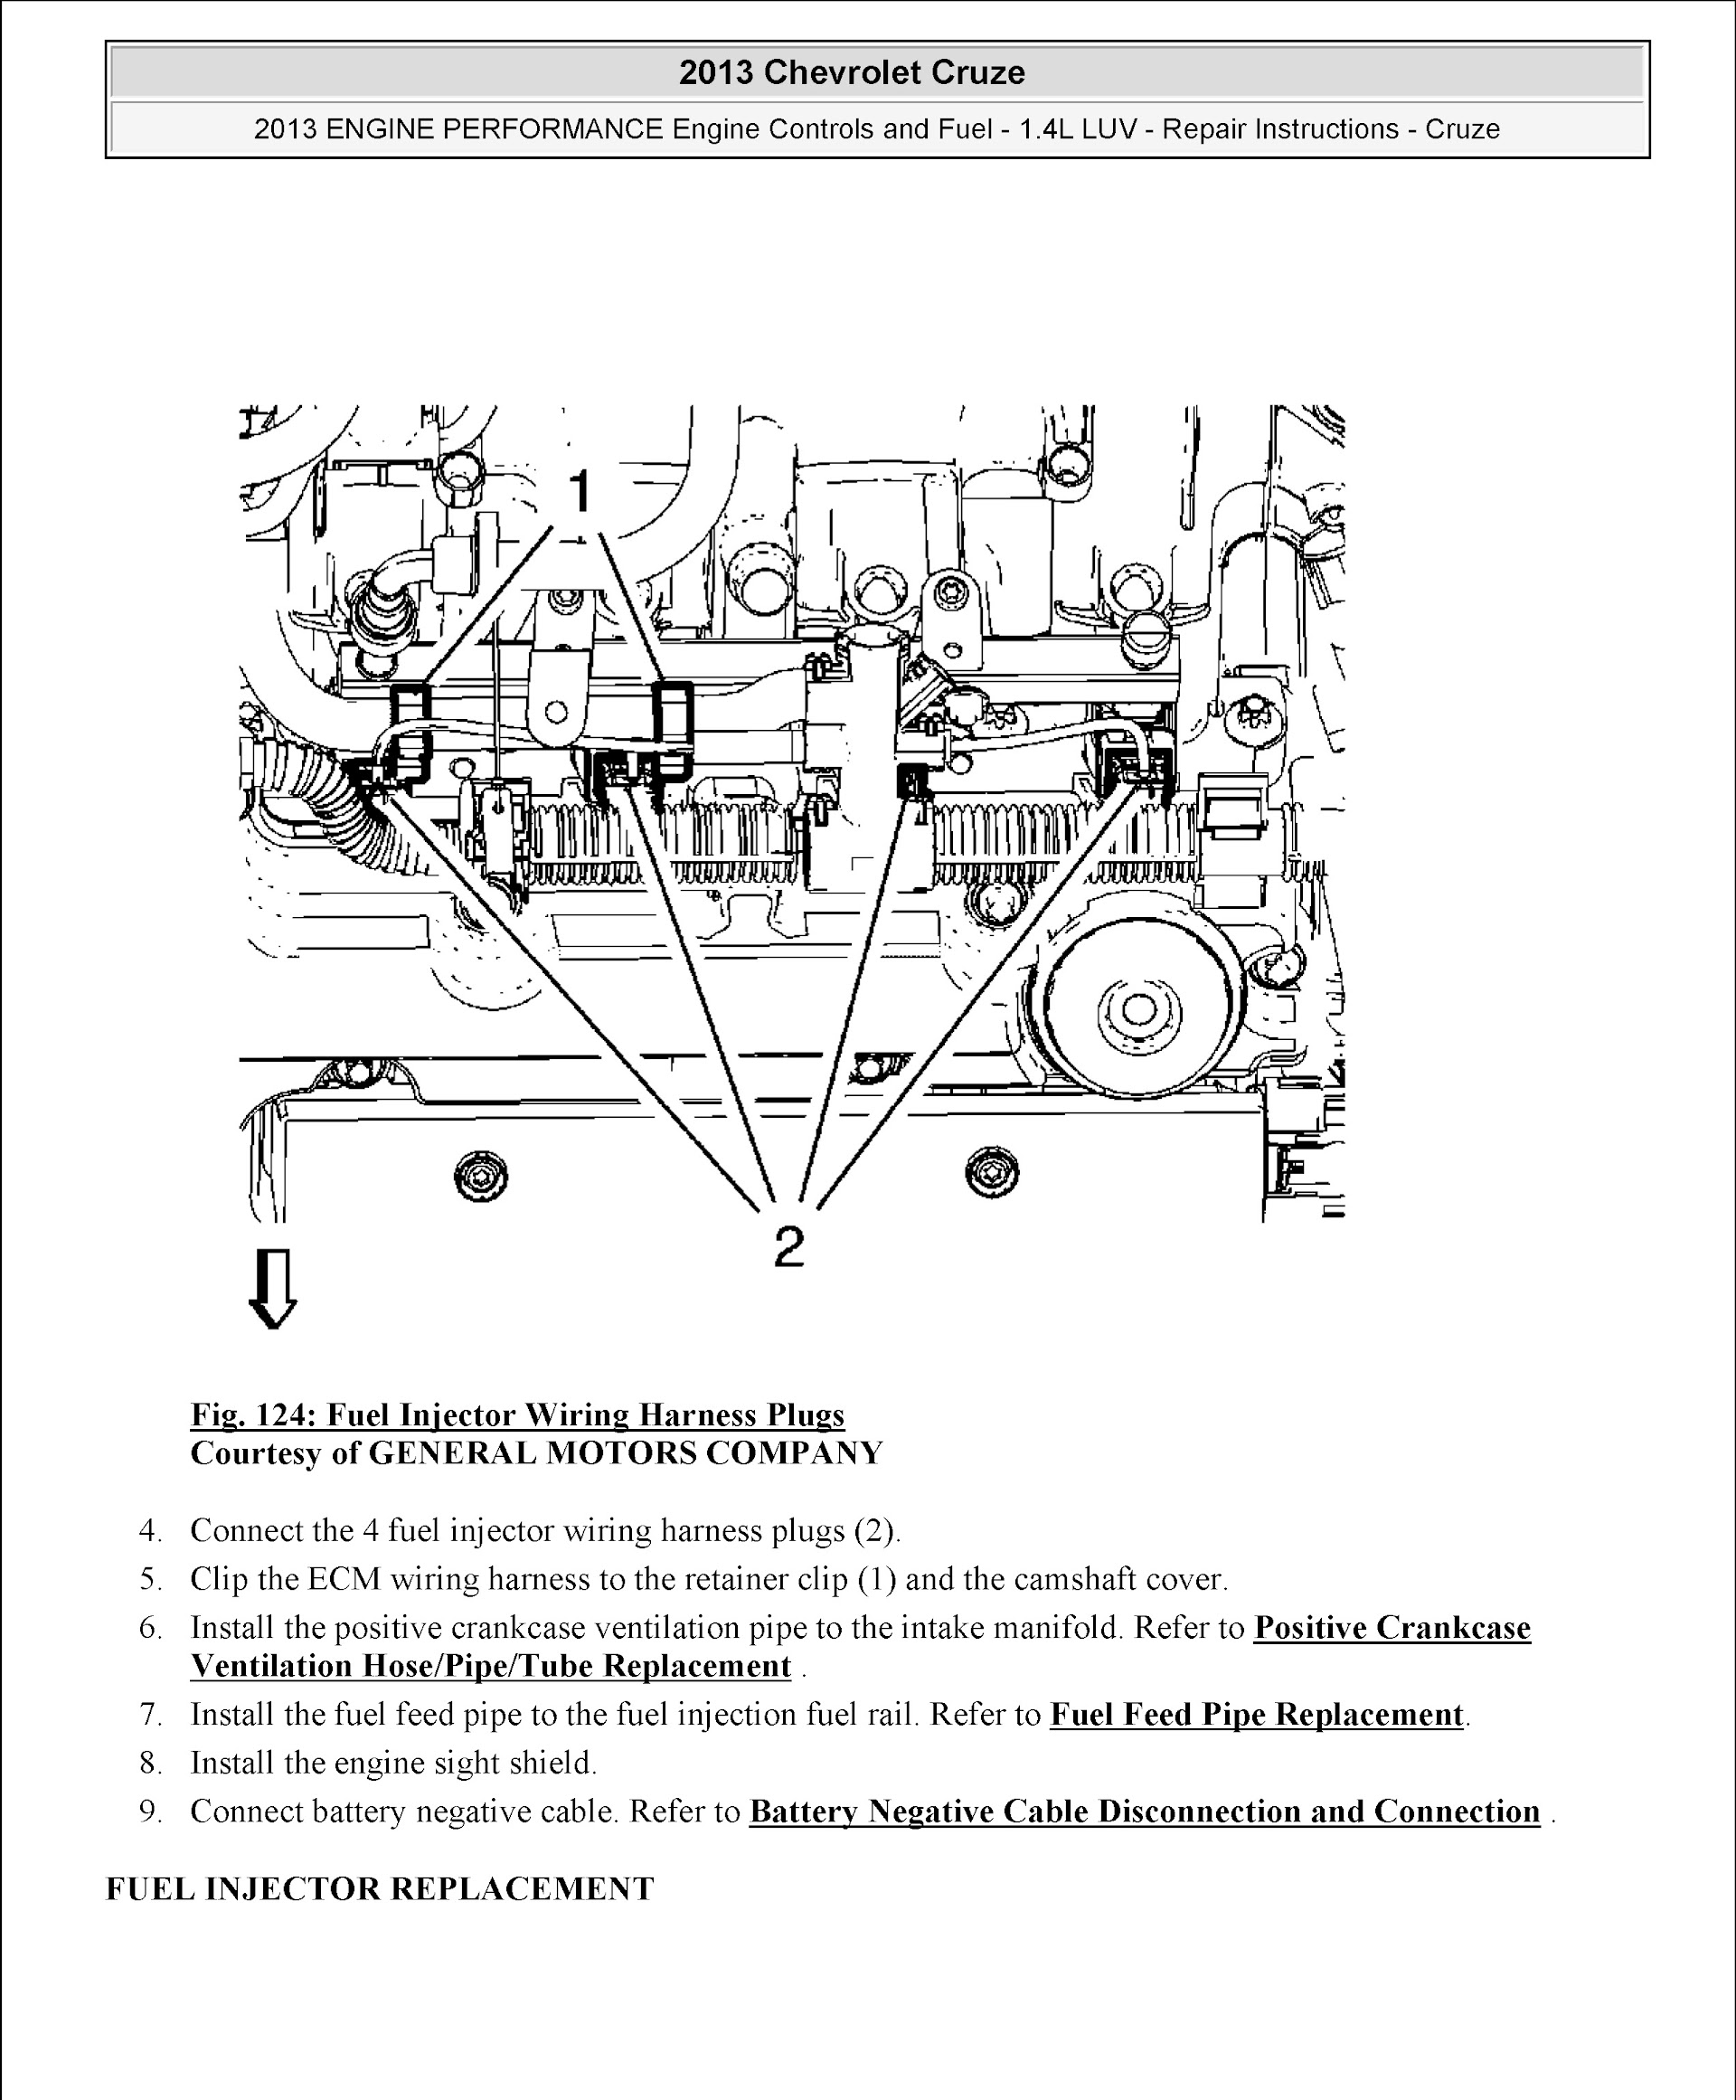 CONTENTS: 2010-2016 Chevrolet Cruze Repair Manual, engine controls and fuel system